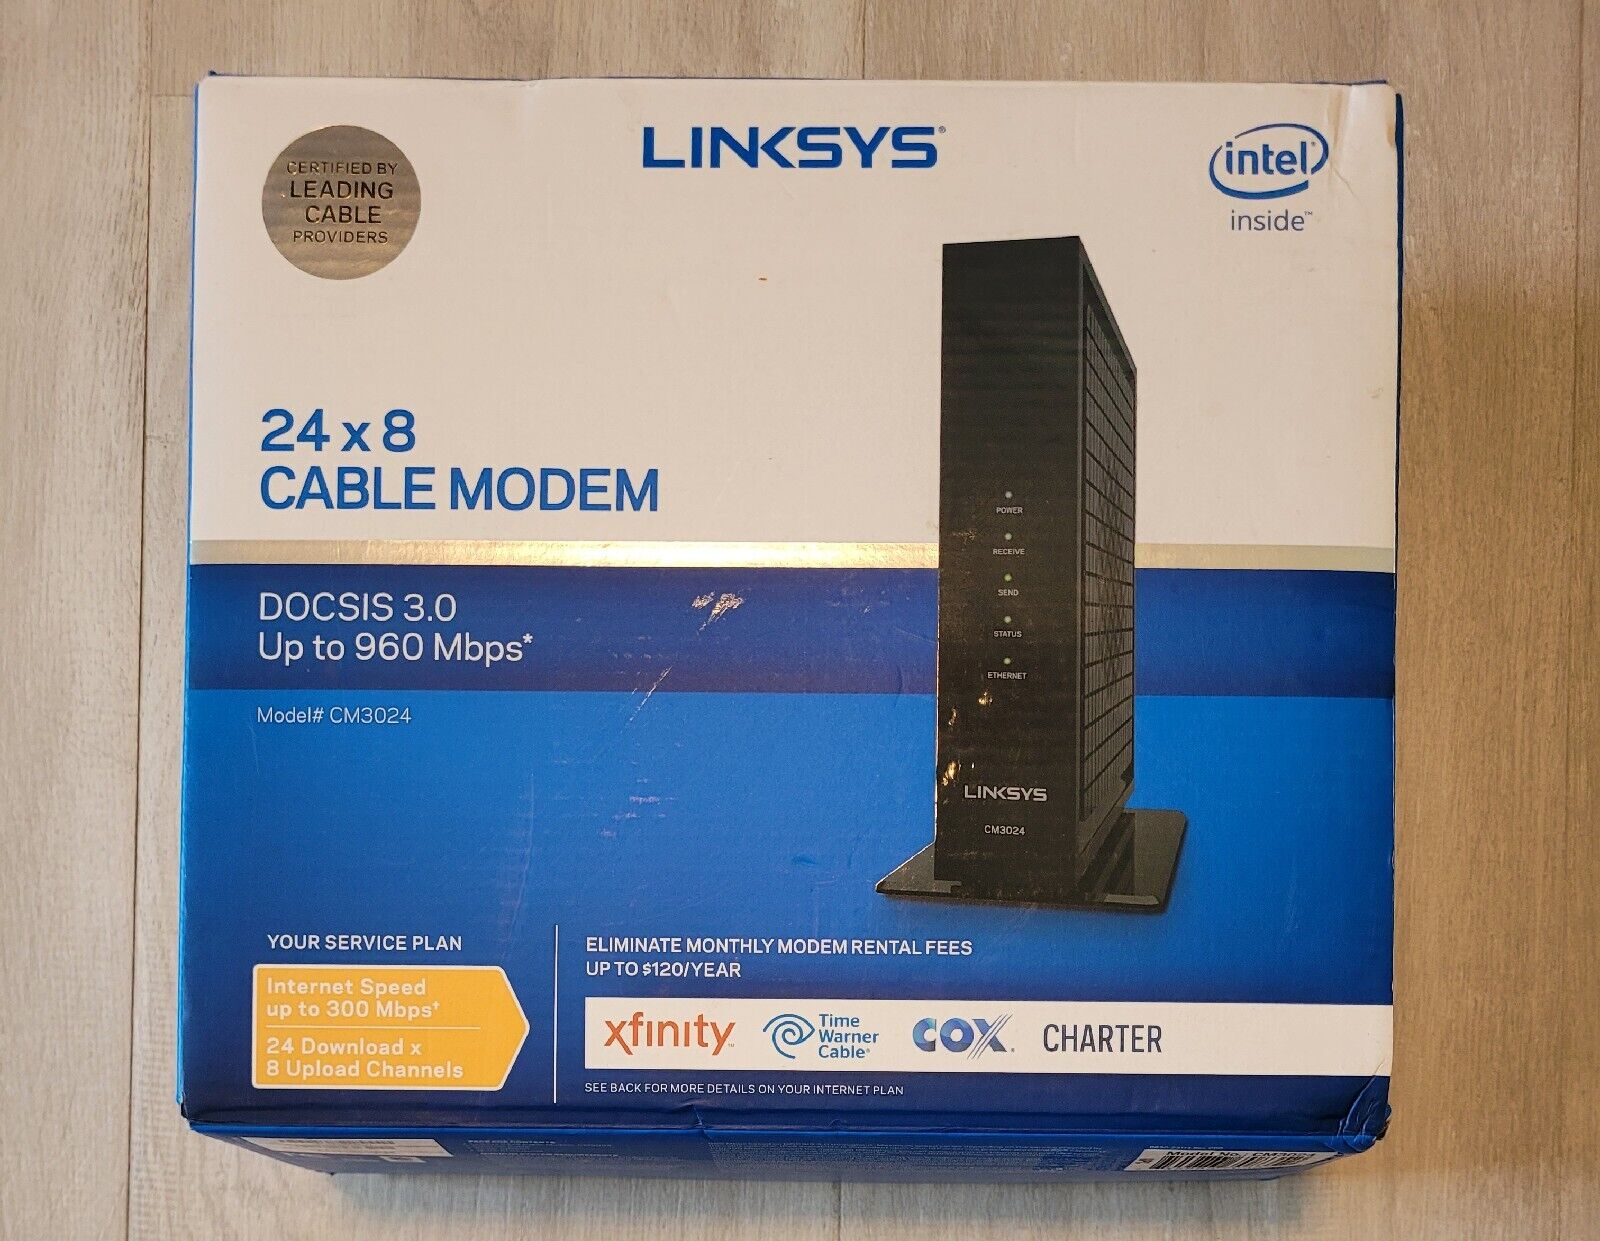 Linksys DOCSIS 3.0 Up To 960 Mbps 24x8 Certified Cable Modem CM3024 